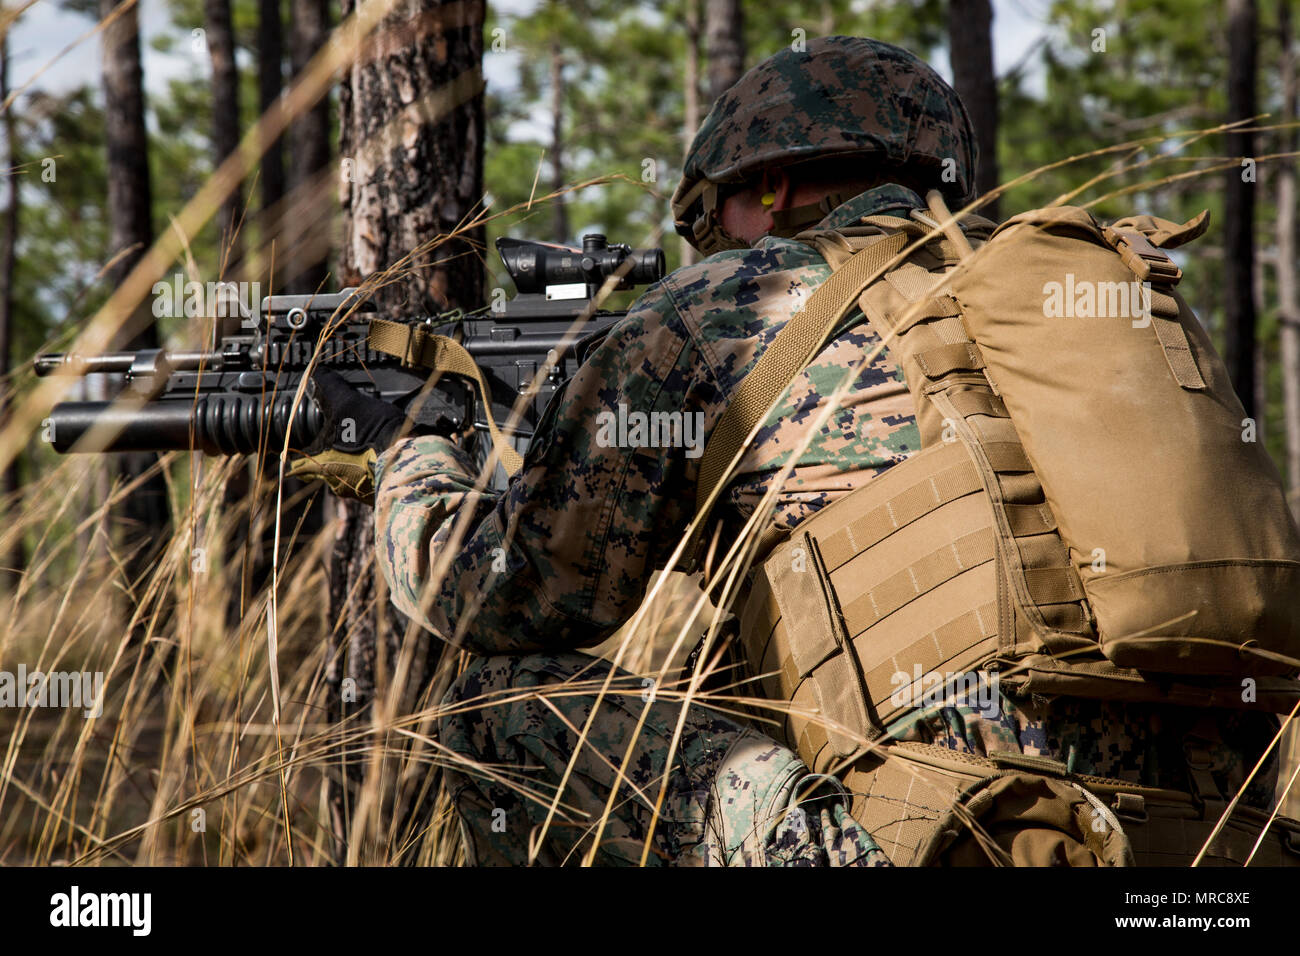 A U.S. Marine attached to Advanced Infantry Training Battalion, School of Infantry-East (SOI-E), looks down the sights of his M4A1 carbine during a combined arms exercise at Camp Lejeune, N.C., April 7, 2017. The mission of SOI-E is to train entry-level and advanced level Marines in the skills required of an Infantry Marine for the operating forces. (U.S. Marine Corps photo by Cpl. Manuel Serrano) Stock Photo